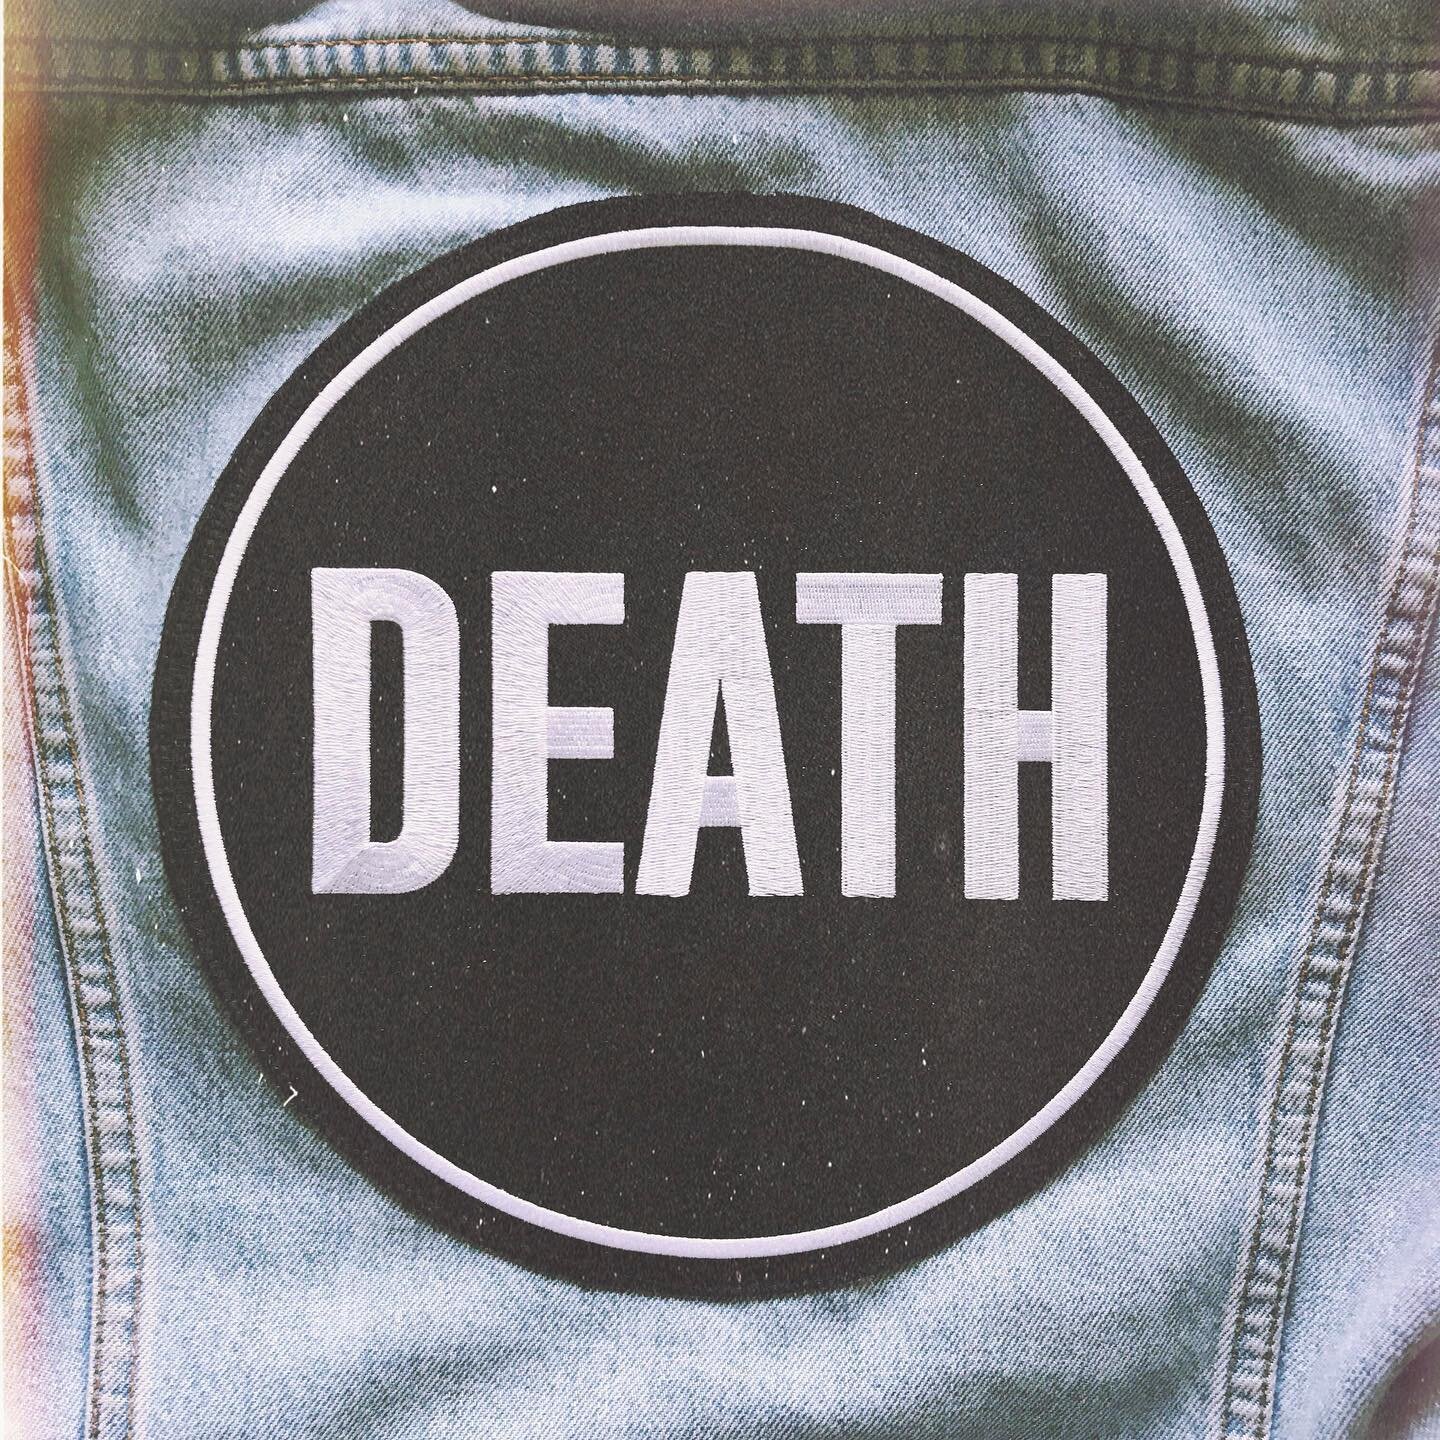 Handful of 10&rdquo; DEATH backpatches added back into the store. Rad as fuck and guaranteed to spruce up your favourite denim. Get &lsquo;em while they&rsquo;re hot!
#deathpatches